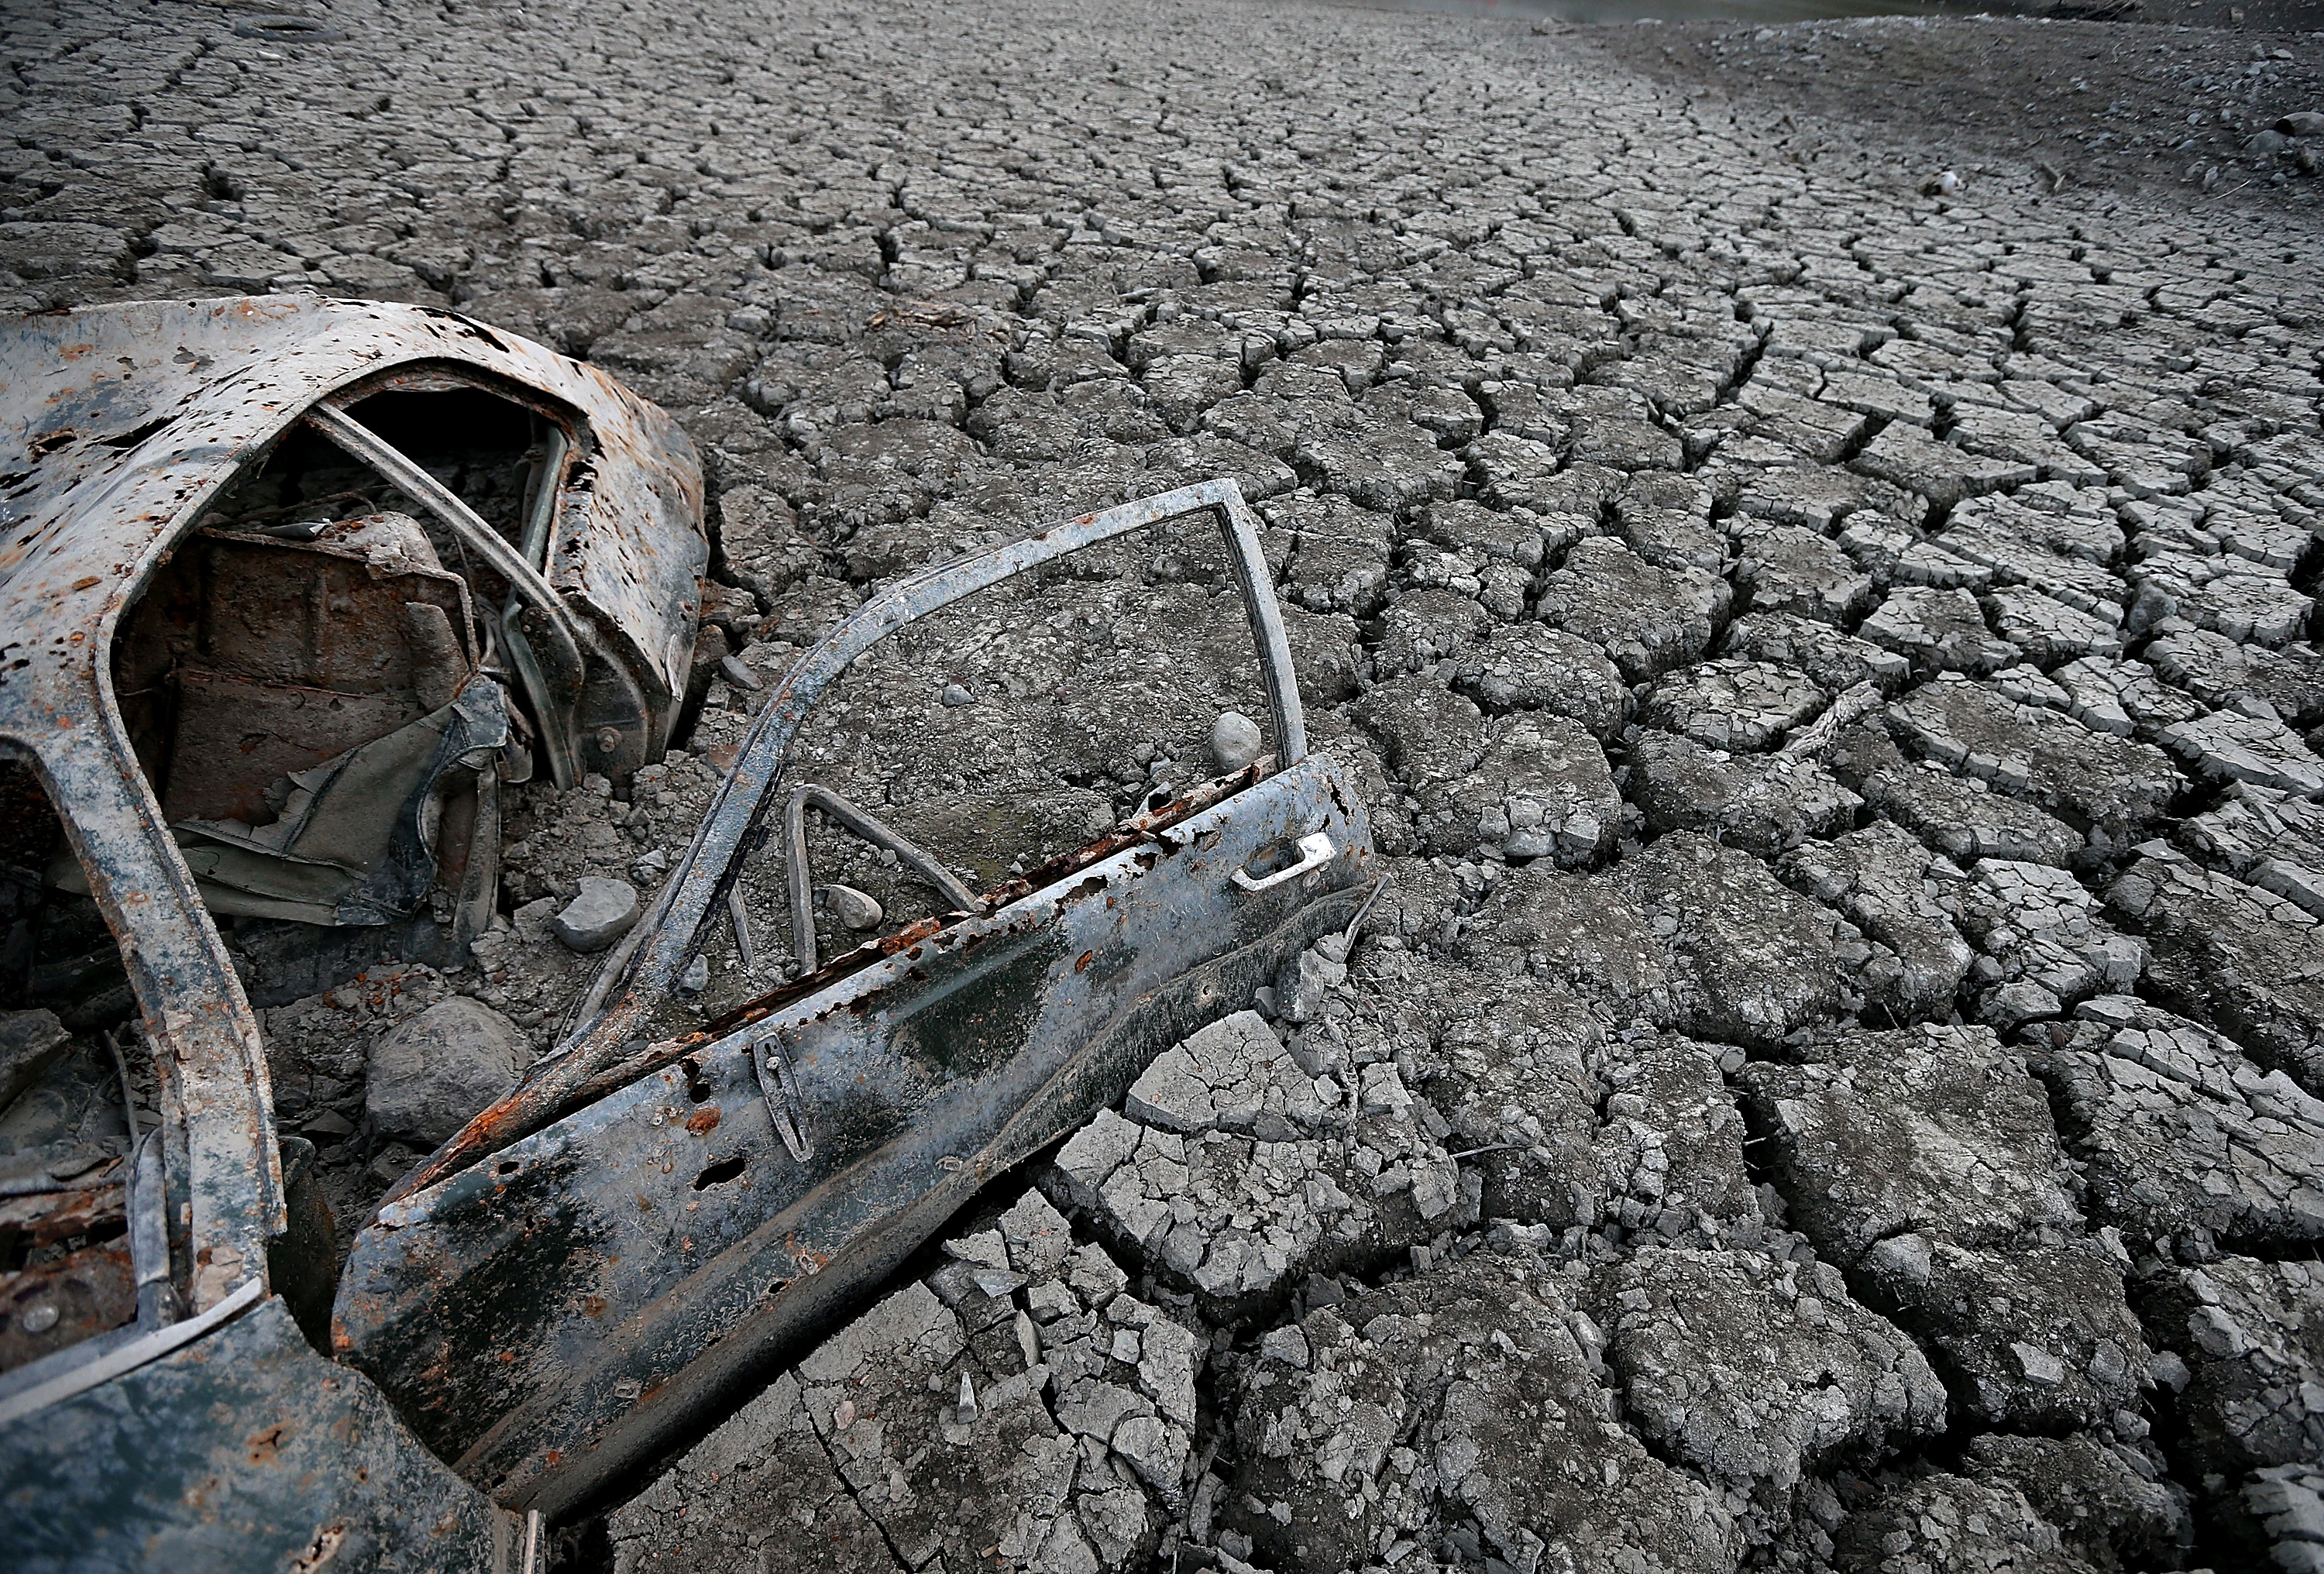 A car sits in dried and cracked earth of what was the bottom of the Almaden Reservoir on Jan. 28, 2014 in San Jose, Calif.